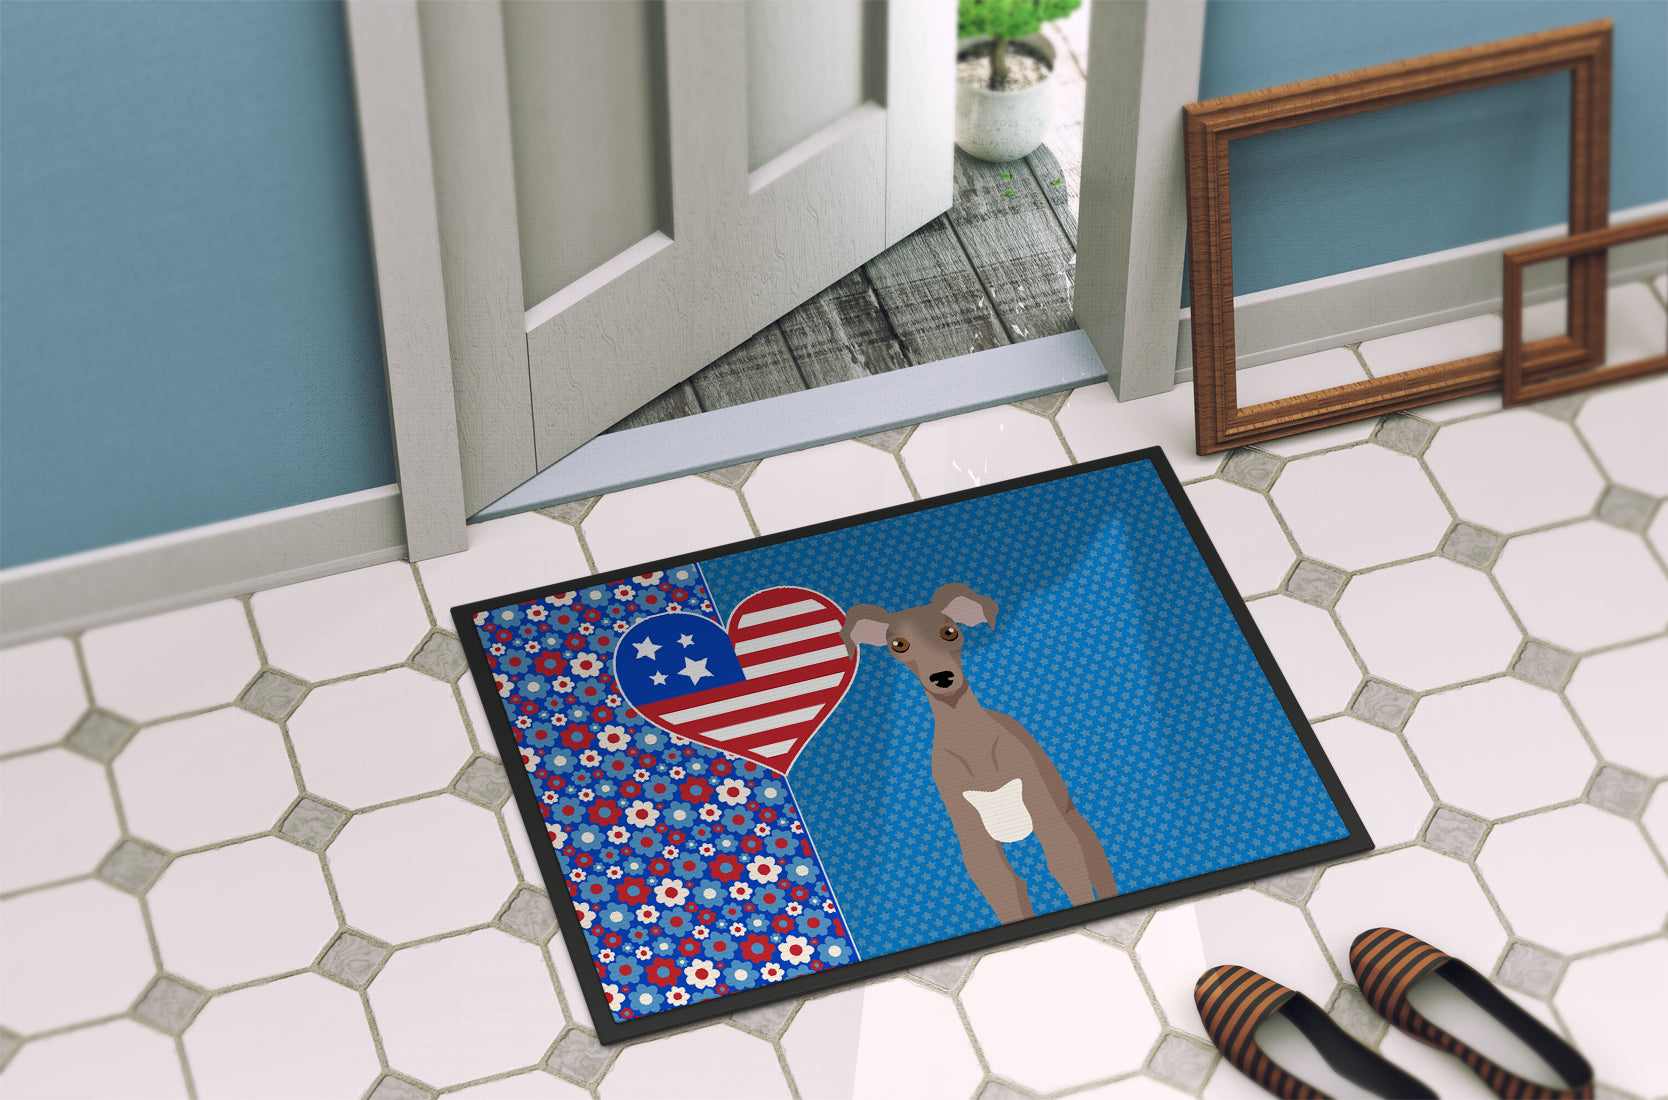 Fawn Italian Greyhound USA American Indoor or Outdoor Mat 24x36 - the-store.com